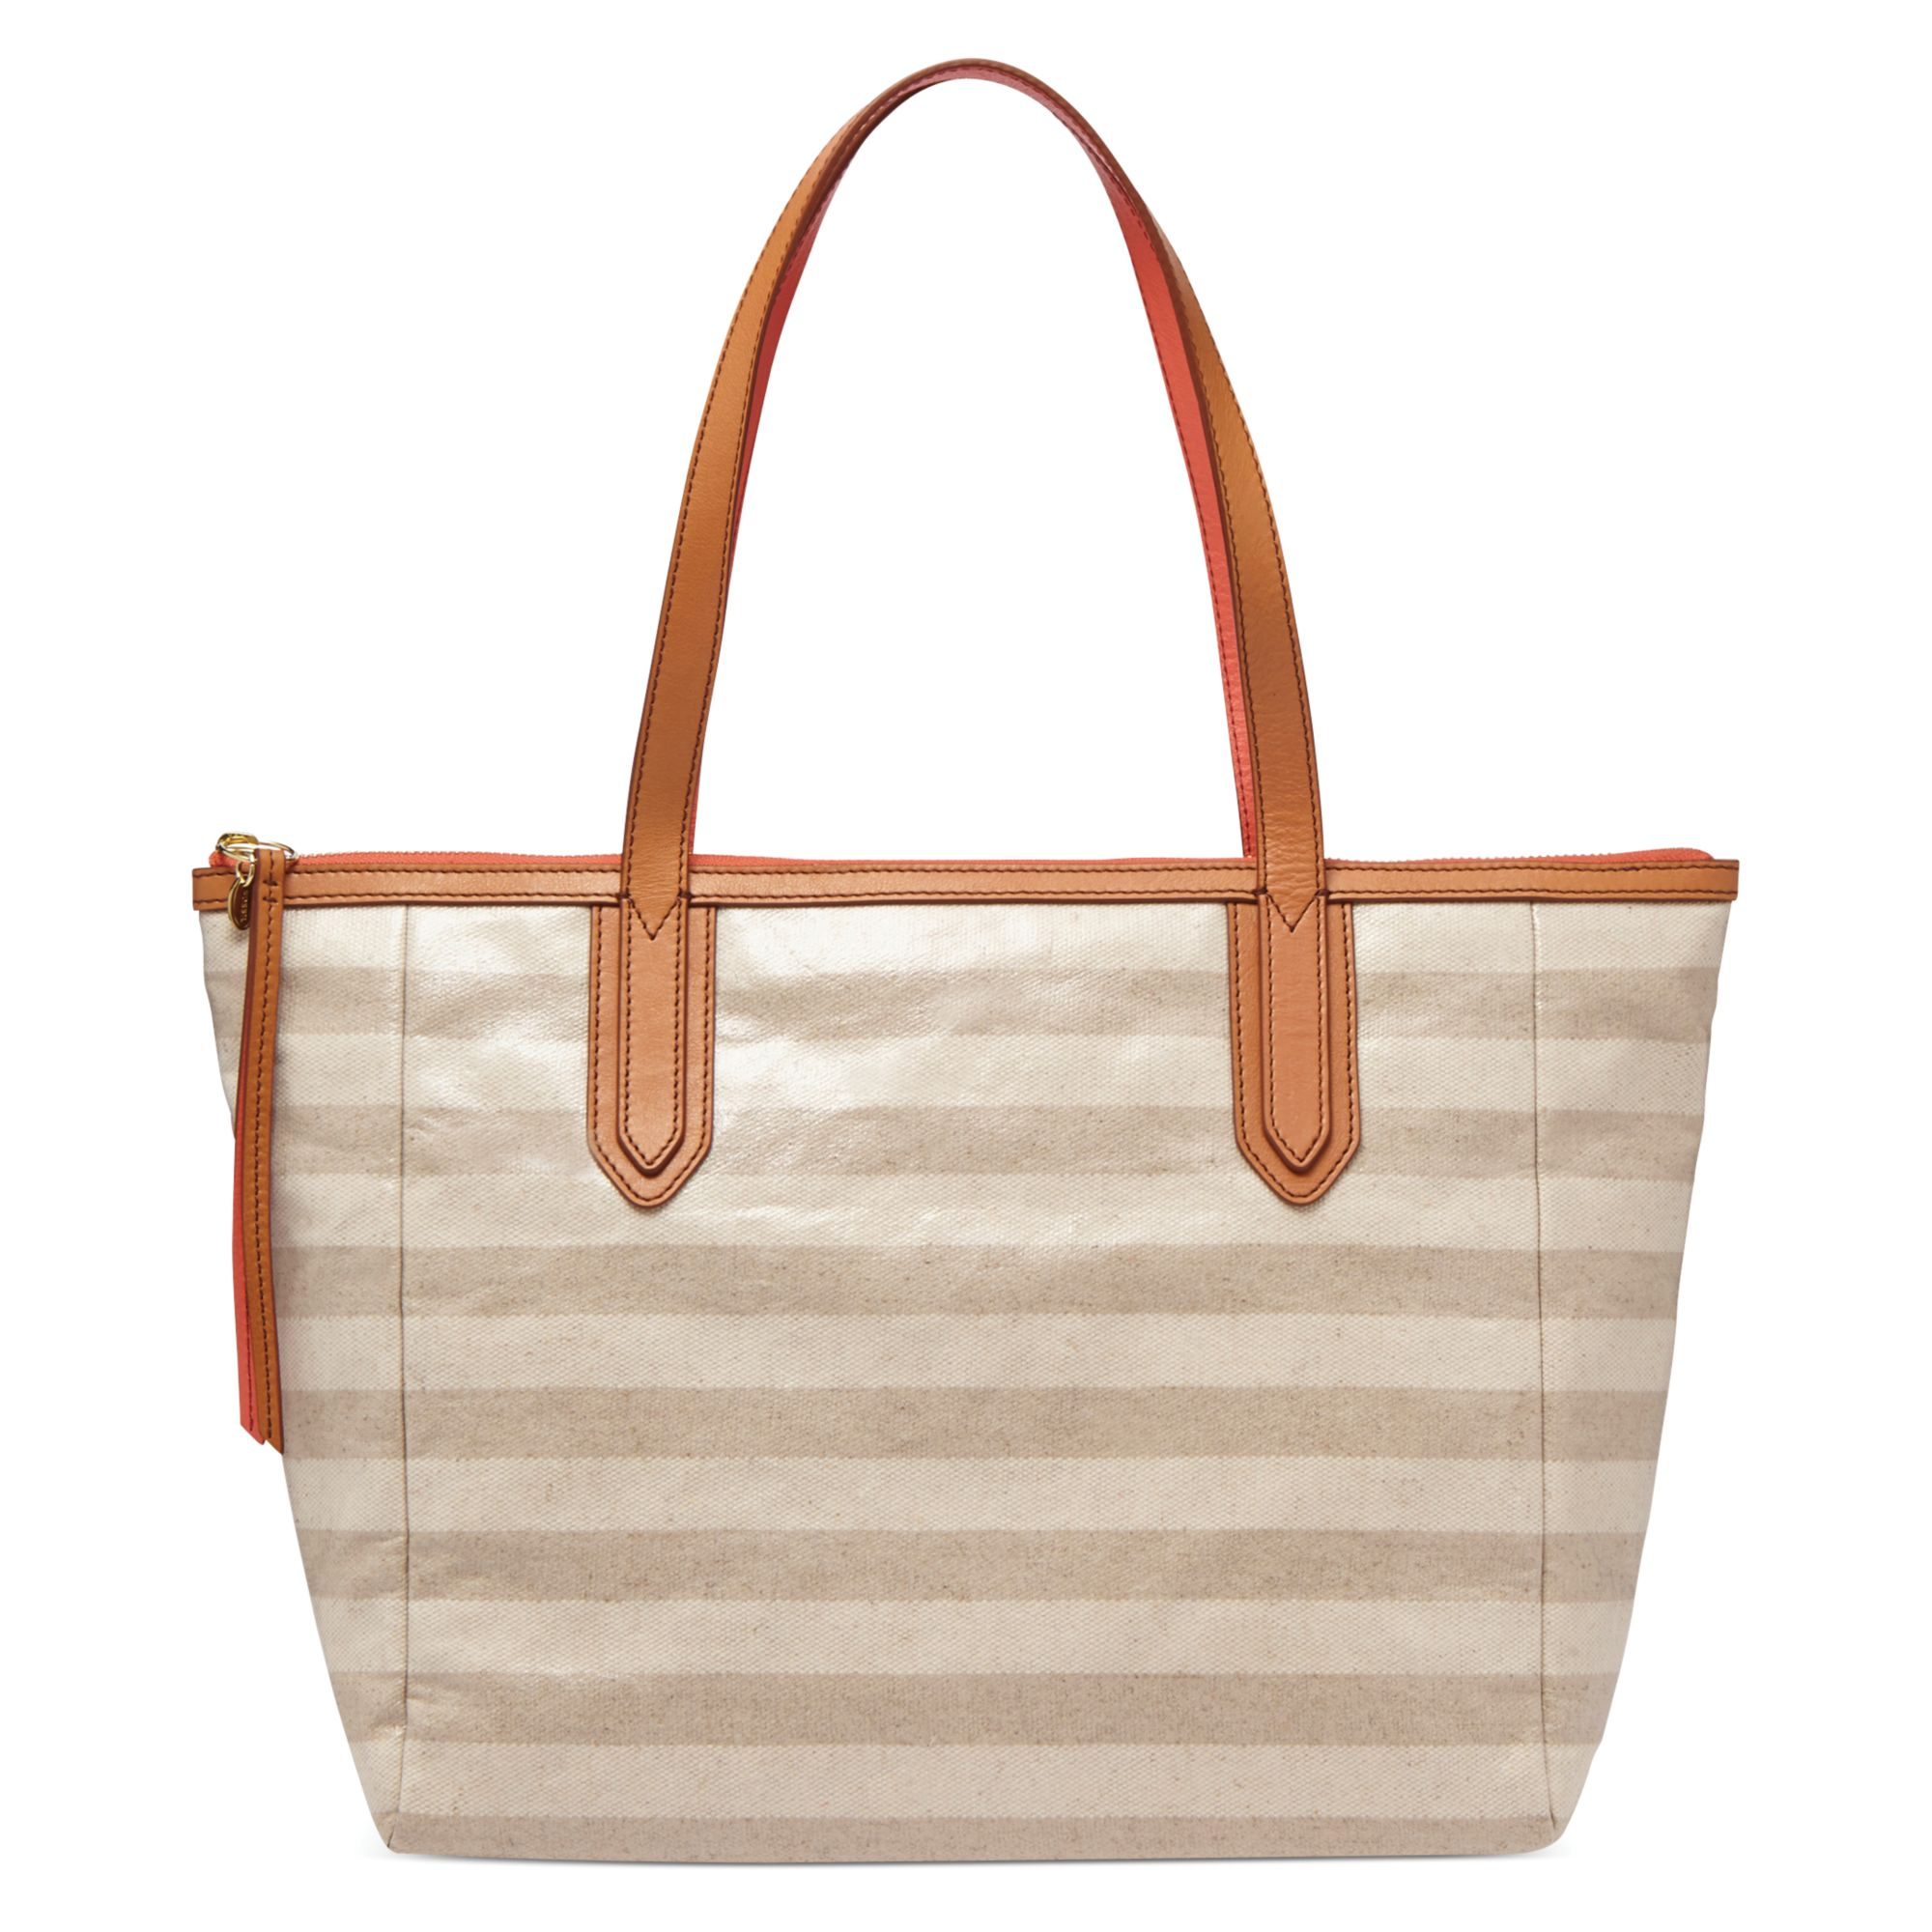 Lyst - Fossil Sydney Coated Canvas Shopper in Natural